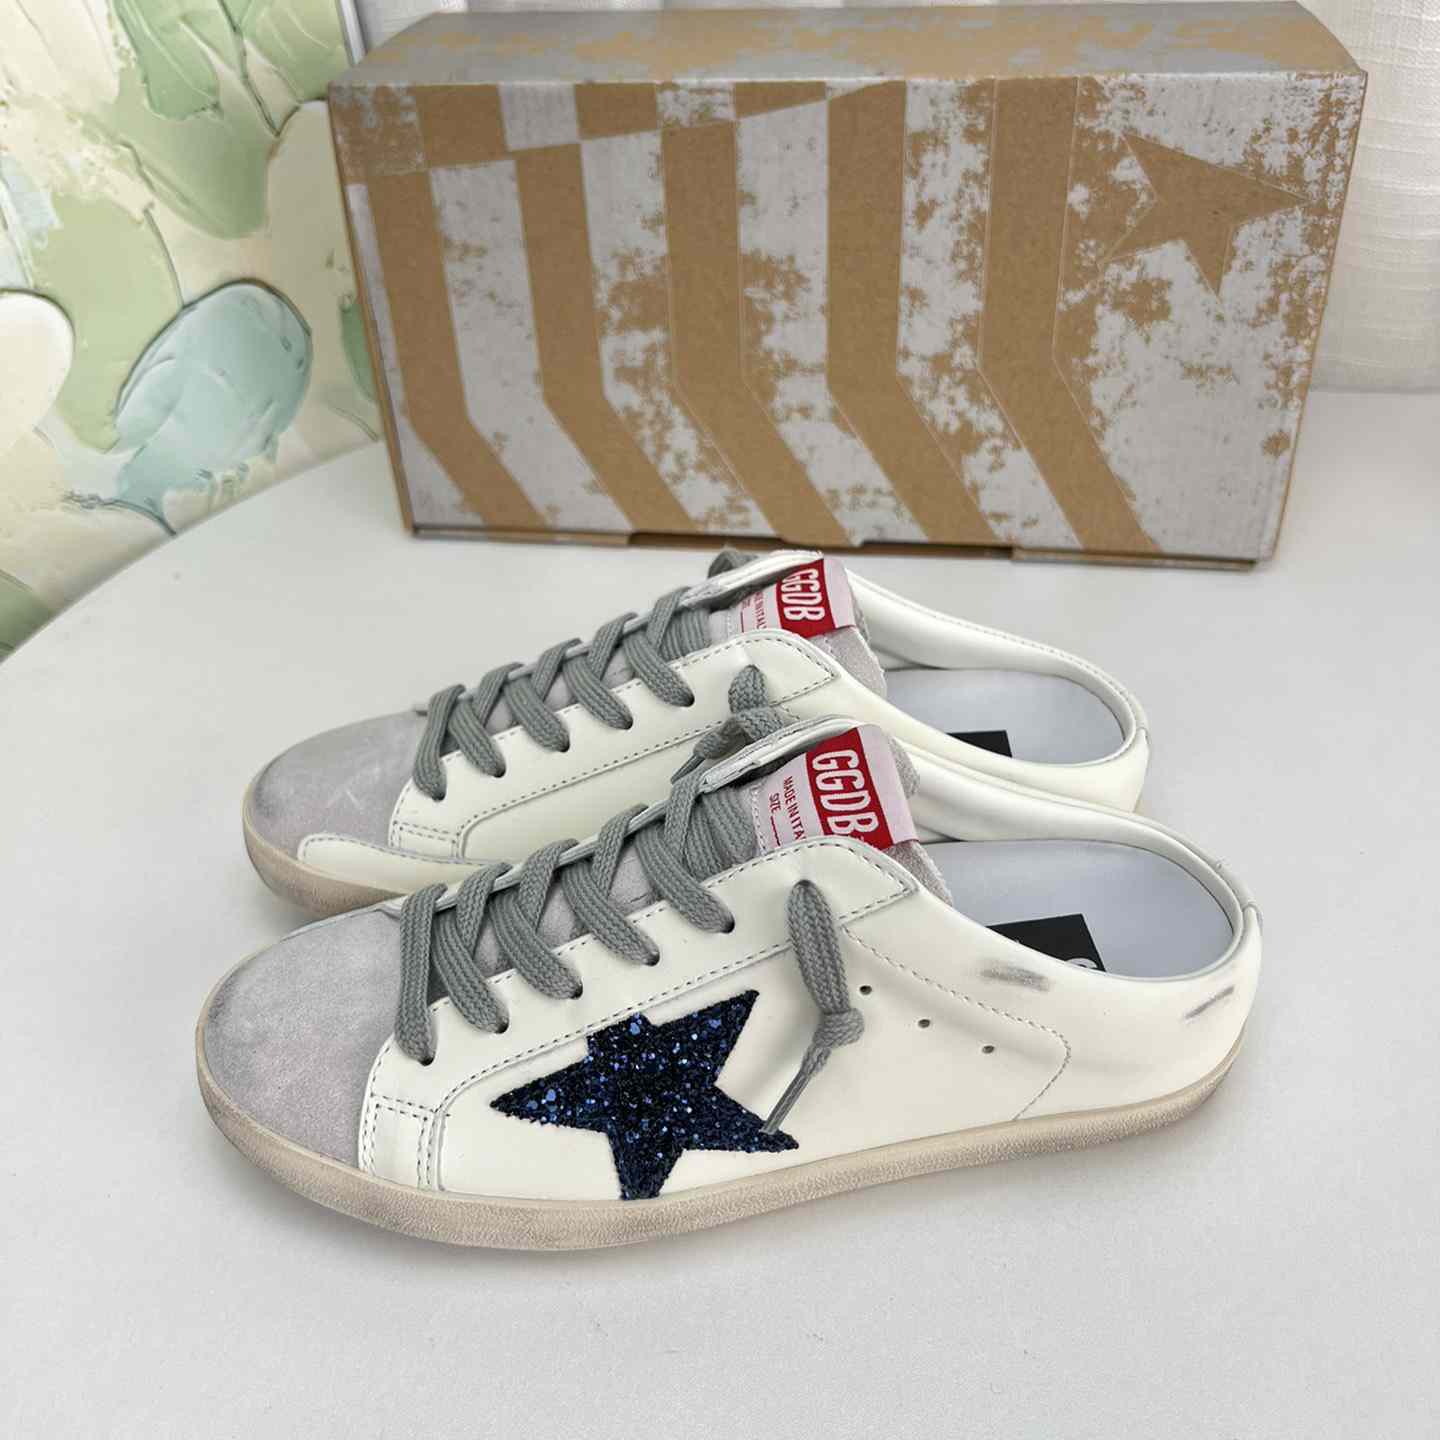 Golden Goose Super-Star Sabots In White Leather With Blue Glitter Star And Dove-Gray Suede Tongue - PerfectKickZ